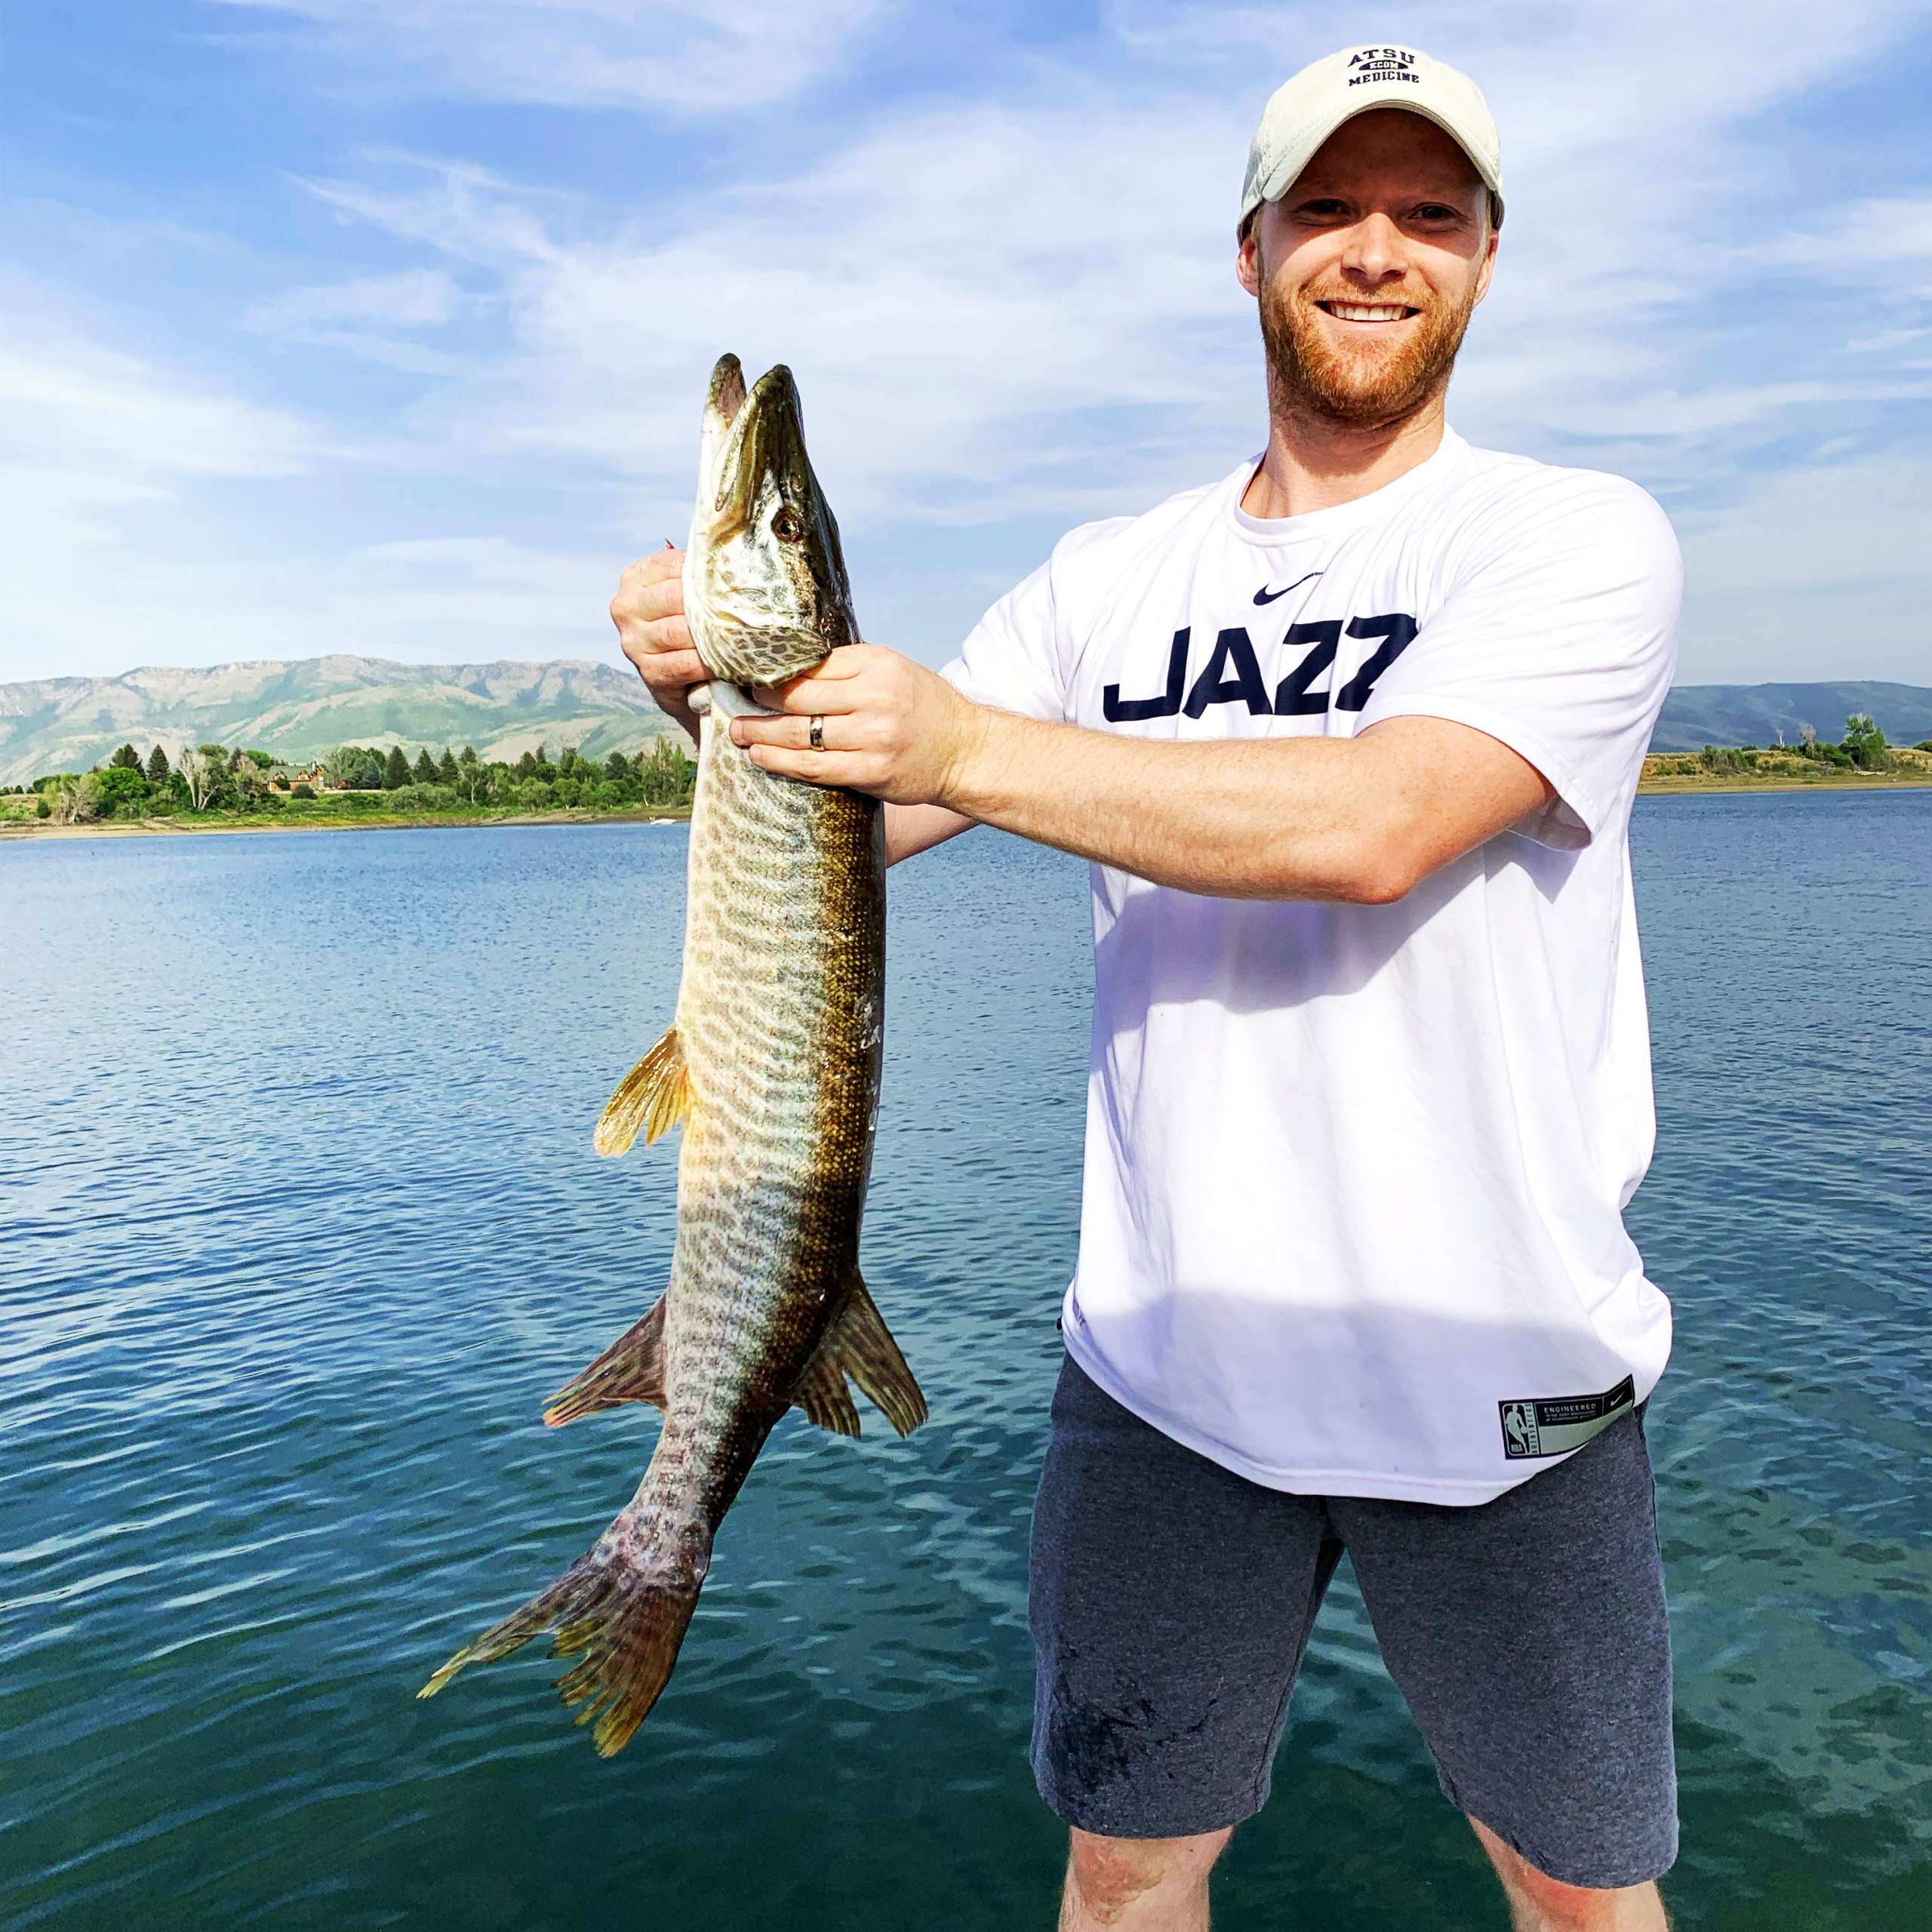 A man is holding a large fish. The fish is longer than the man's entire upper body.